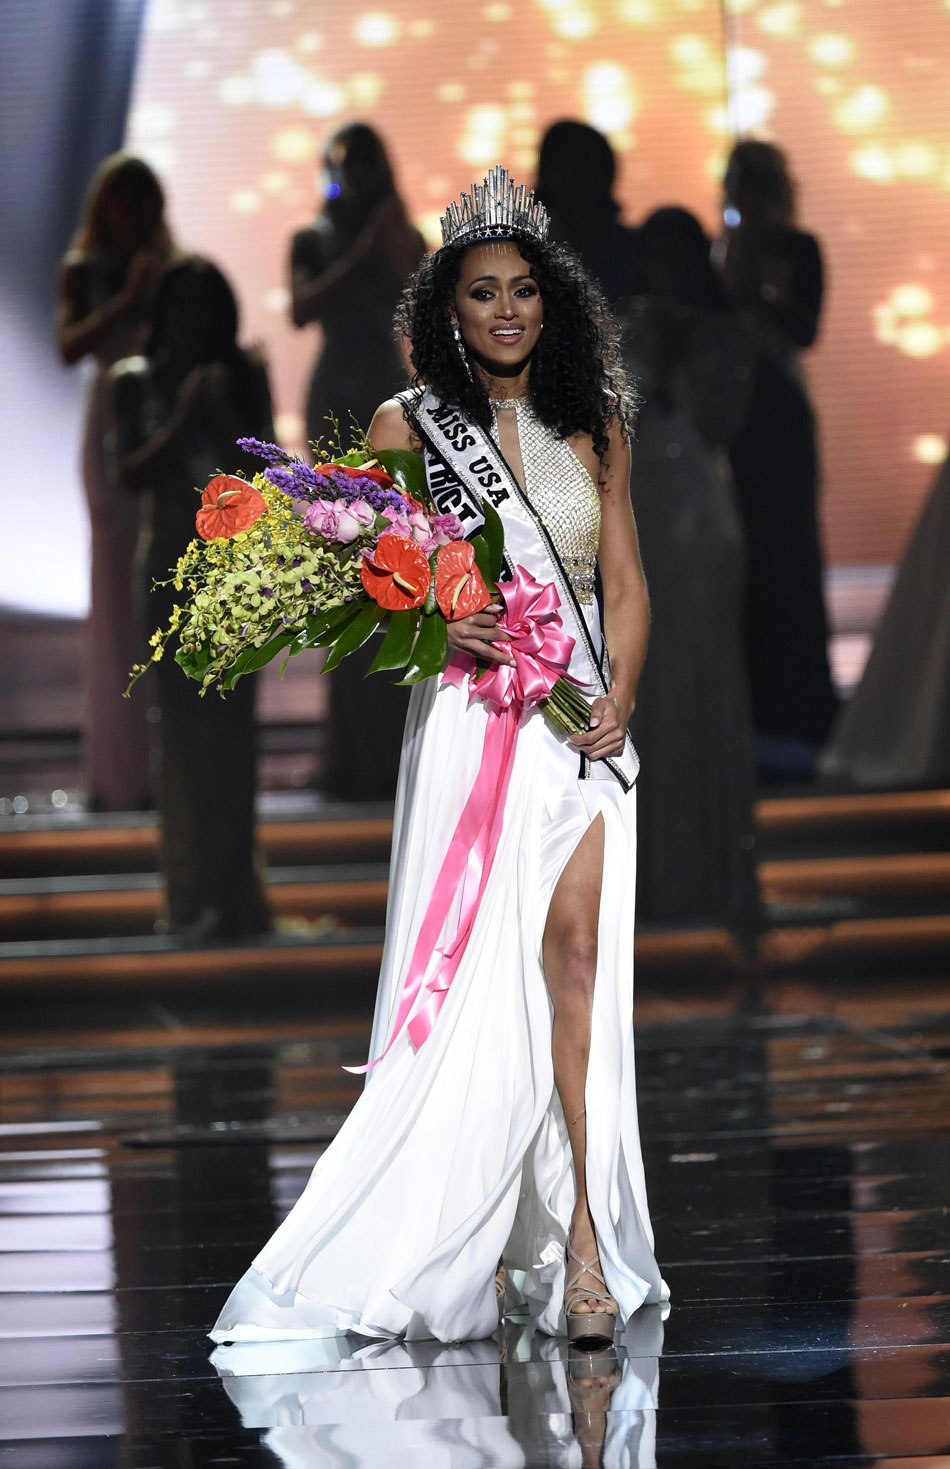 District of Columbia contestant named Miss USA ABSCBN News